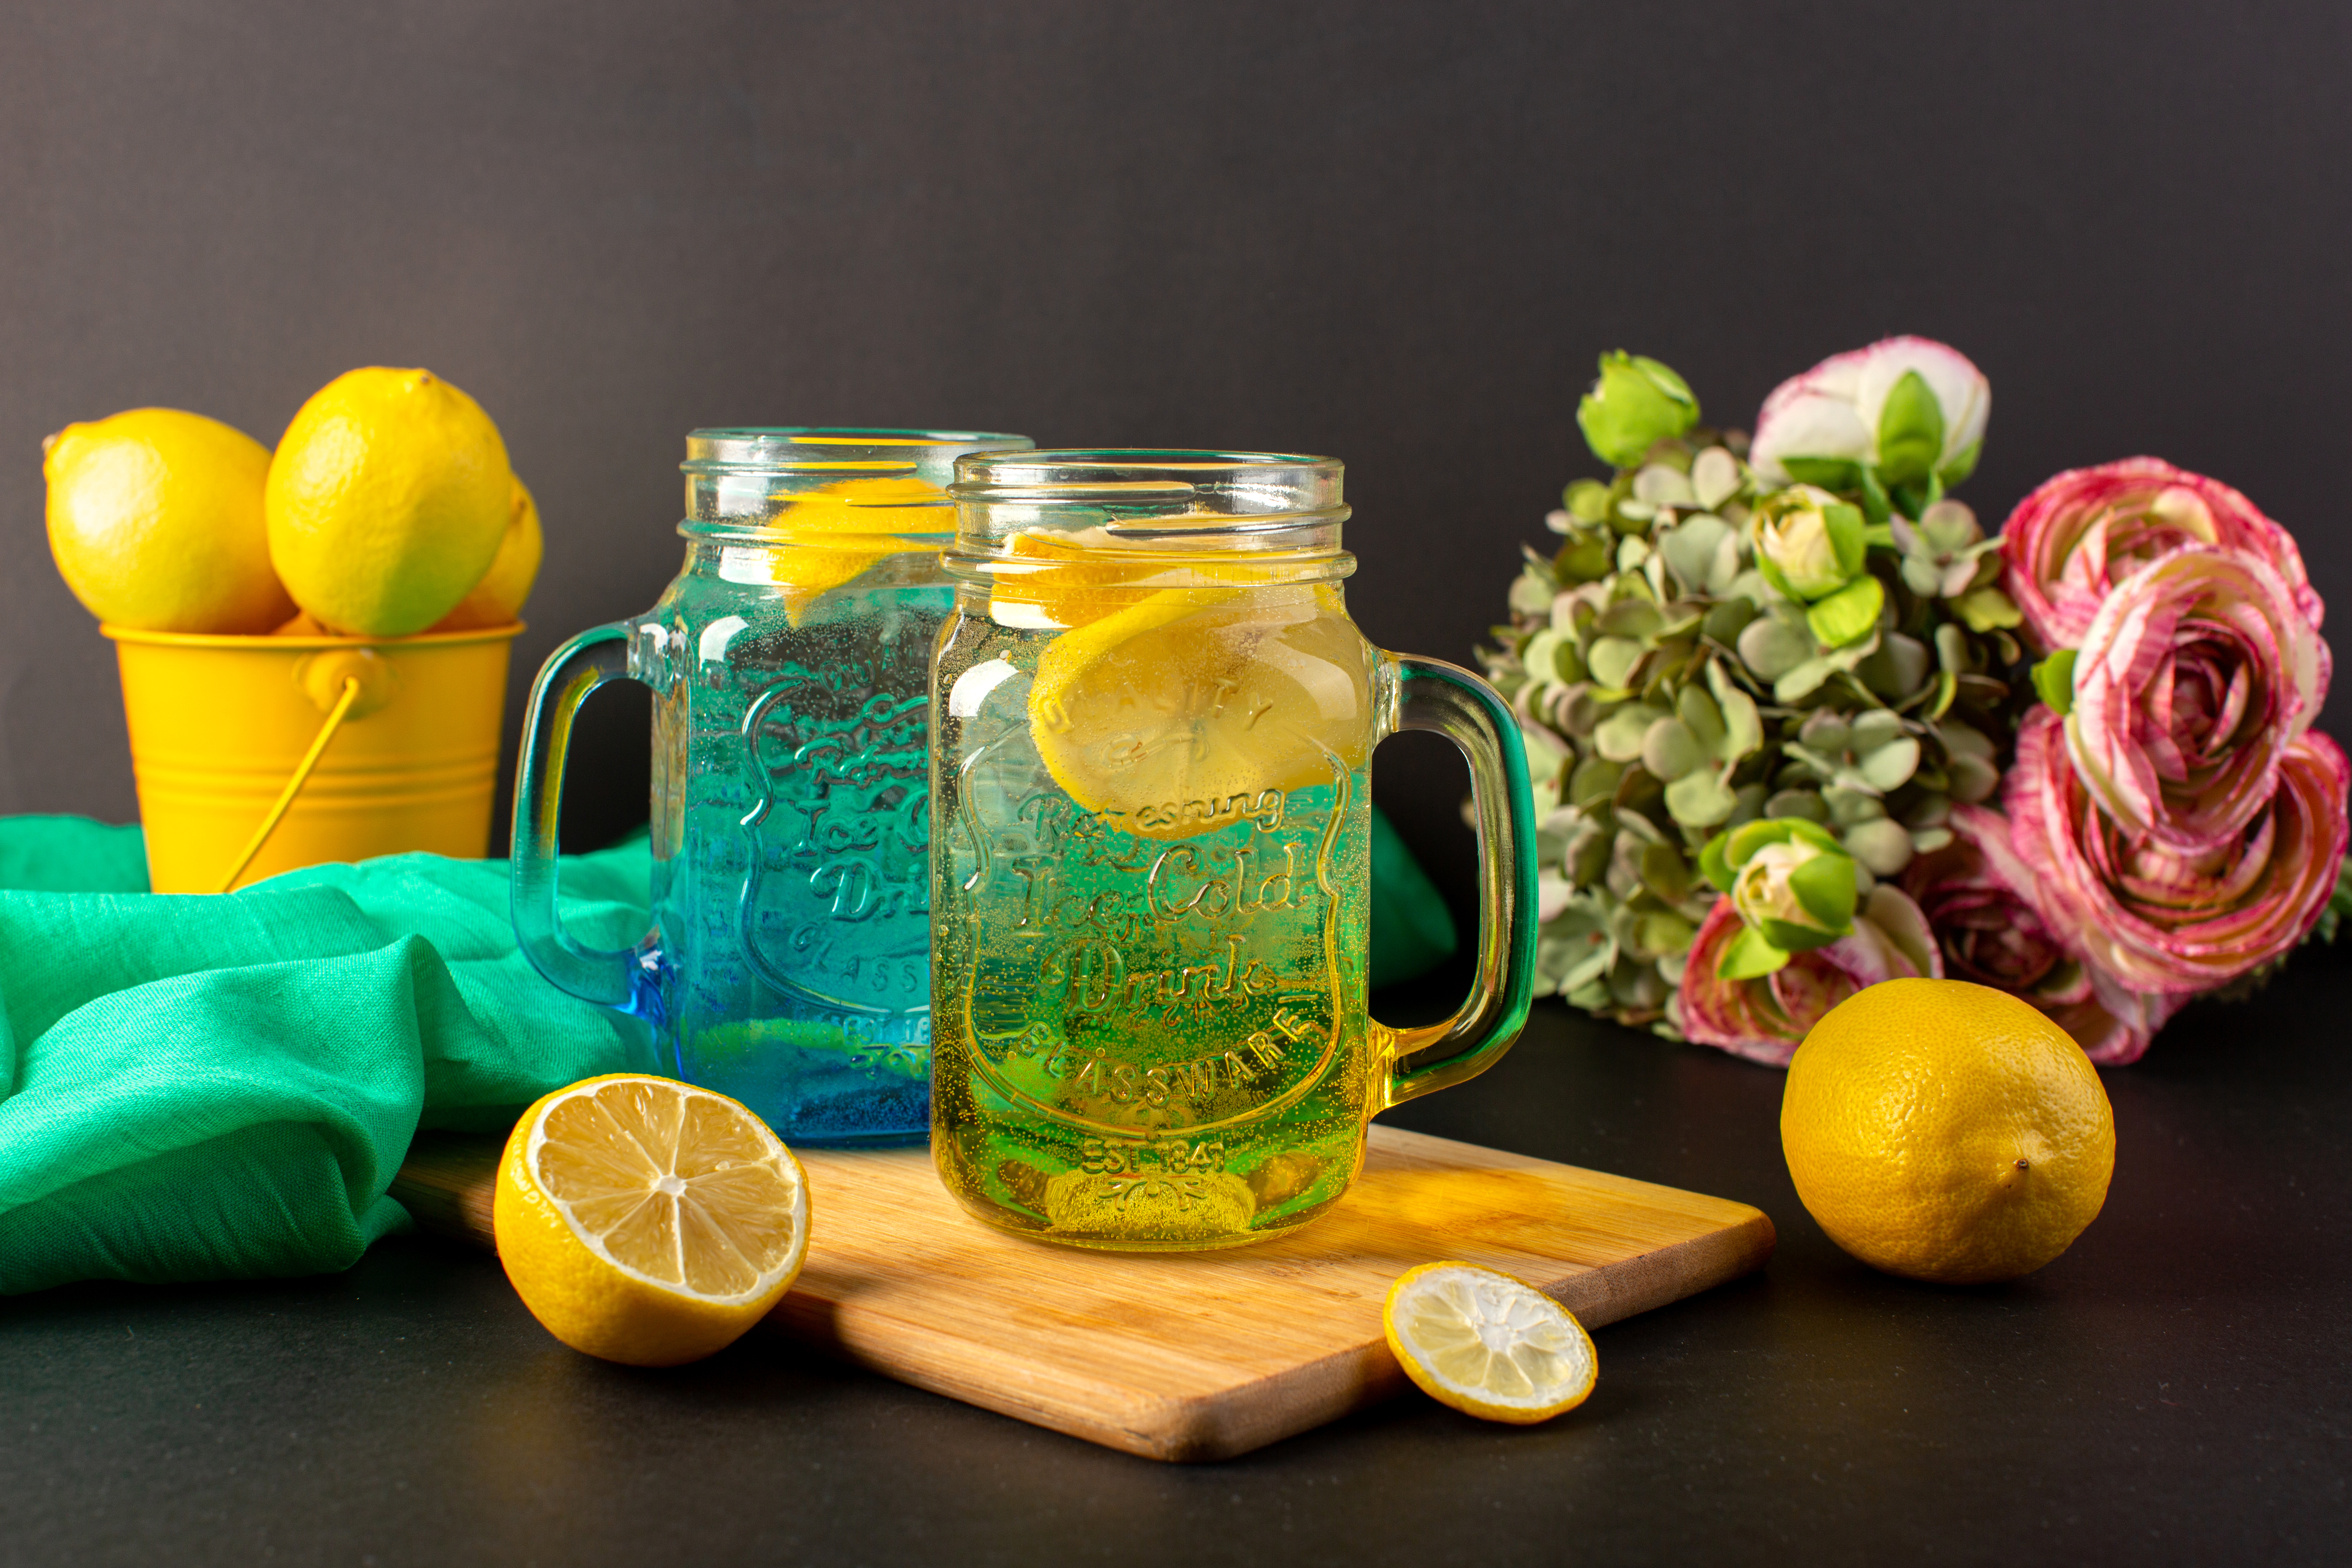 front-view-lemon-cocktail-fresh-cool-drink-inside-glass-cups-sliced-whole-lemons-along-with-flowers-dark-background-cocktail-drink-fruit